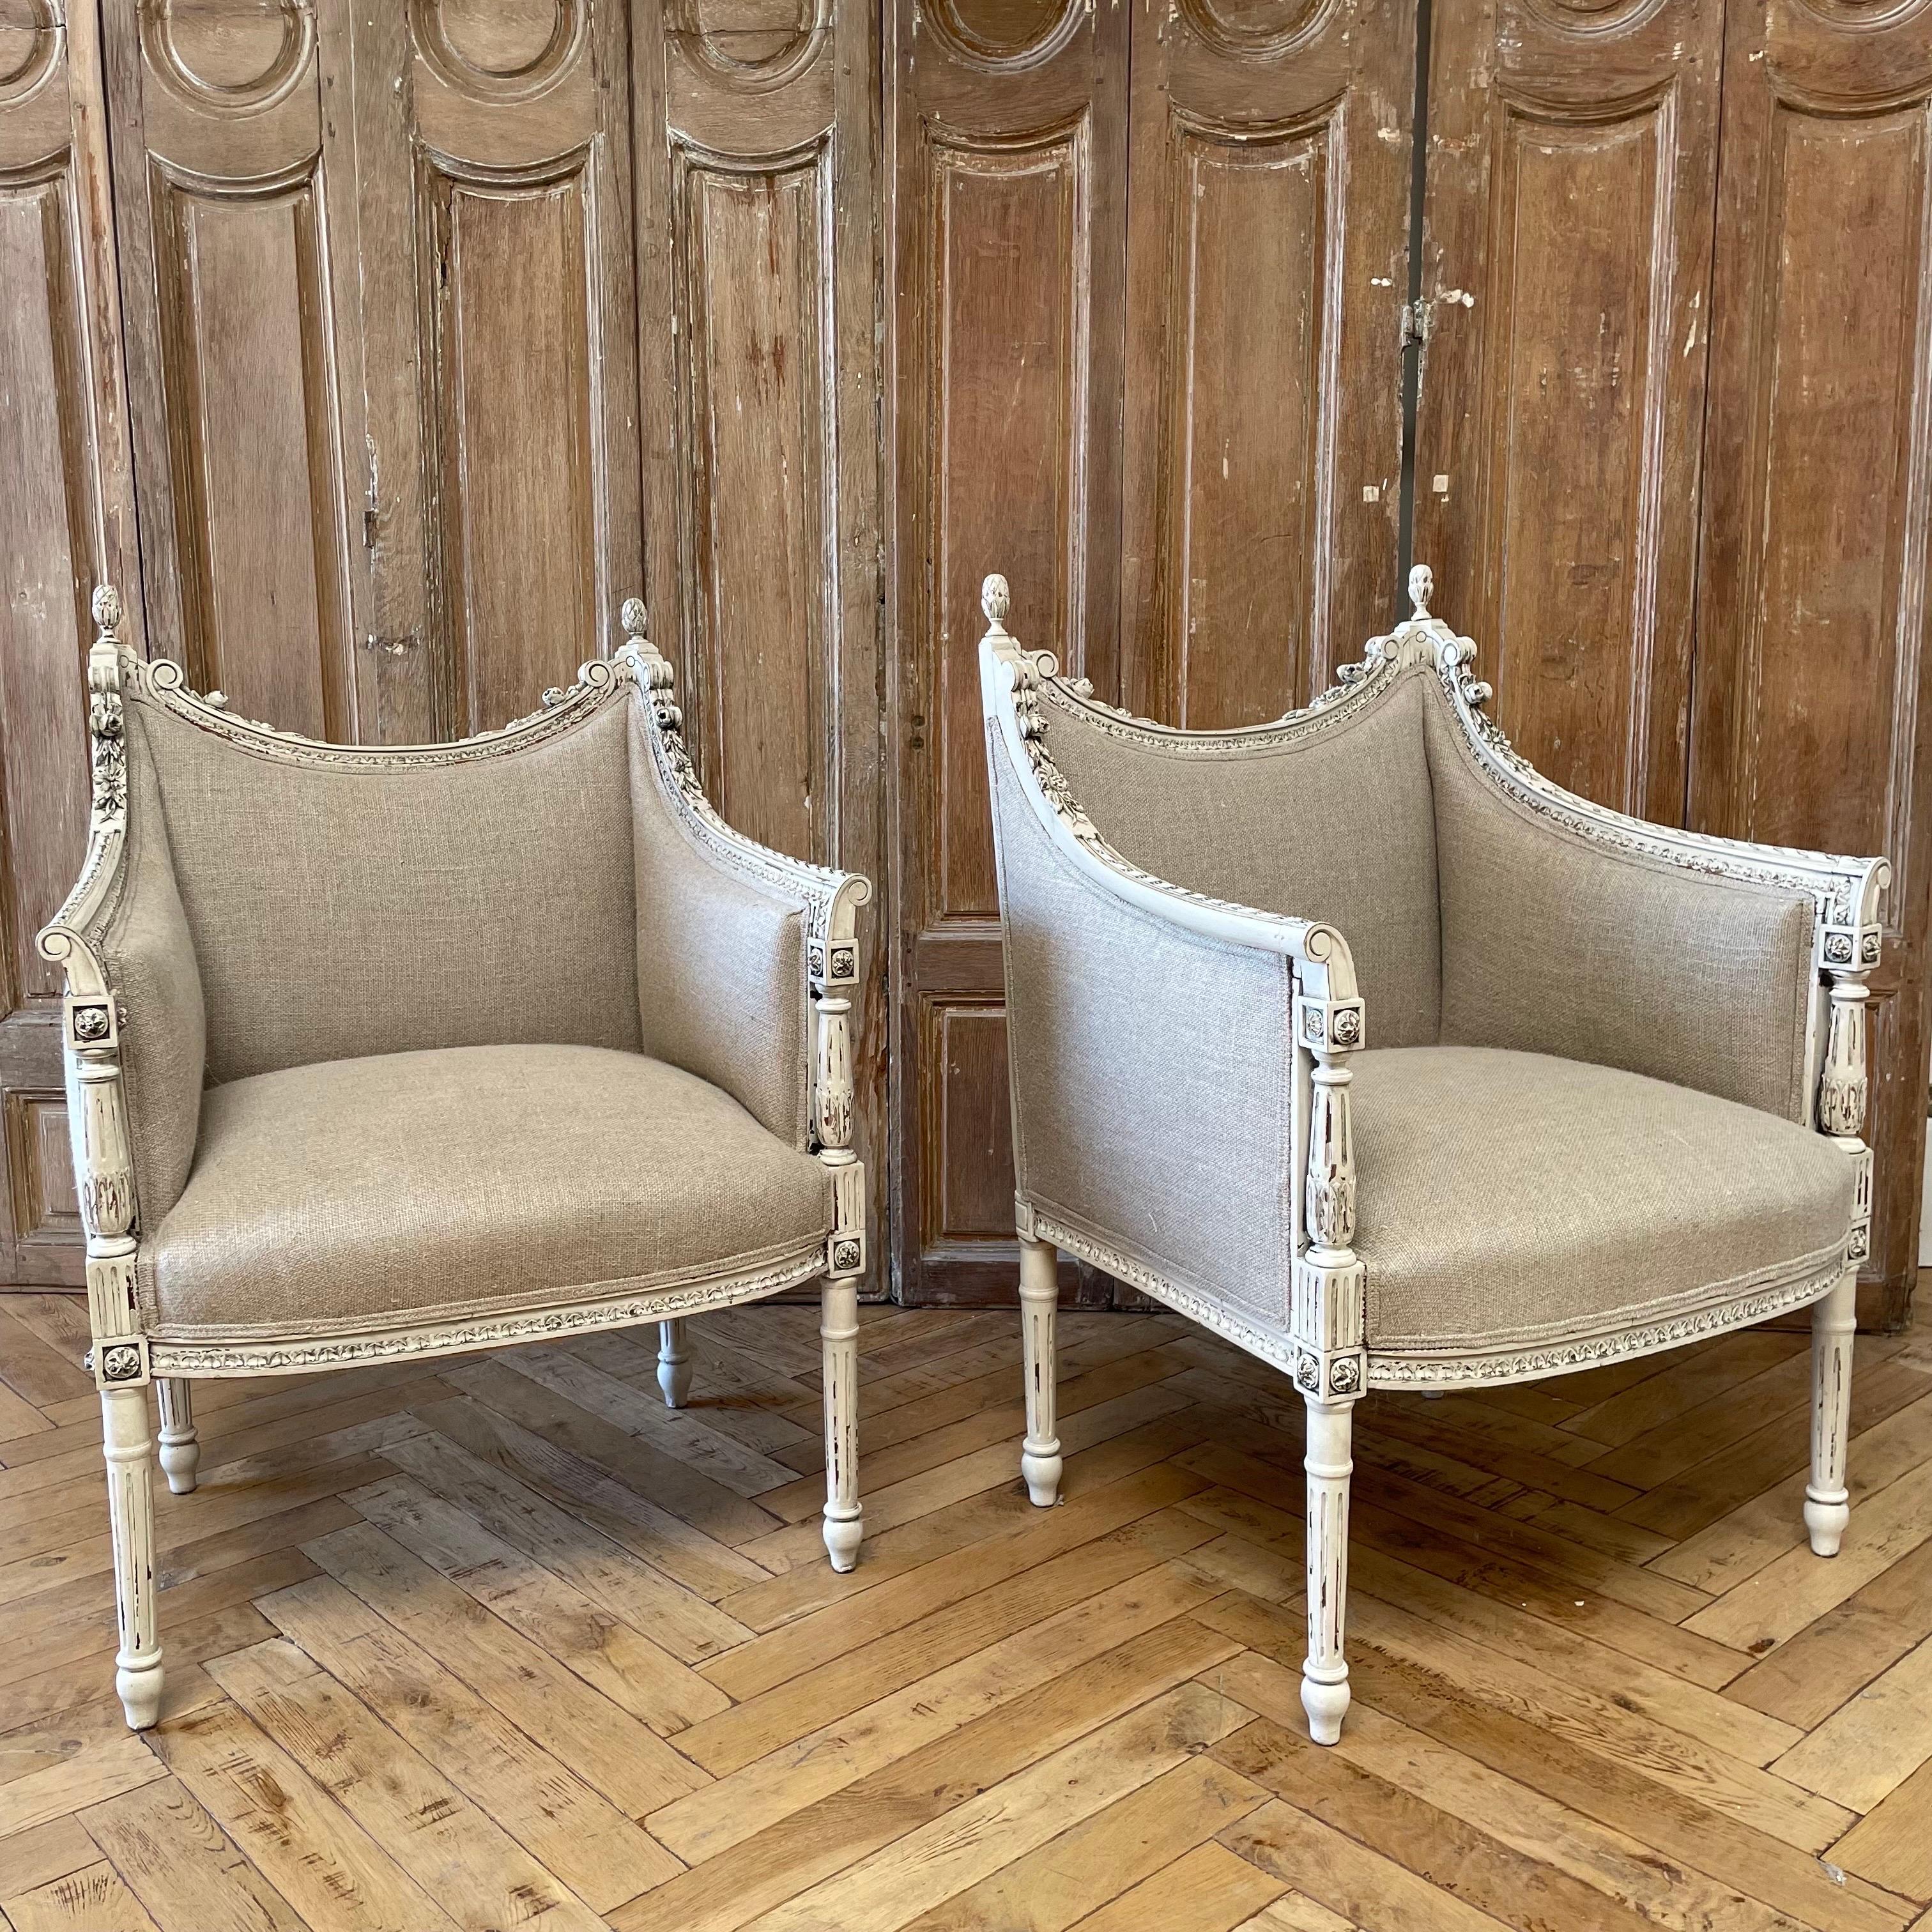 Pair of Antique Louis XVI Style Chairs Upholstered in Irish Natural Linen For Sale 9